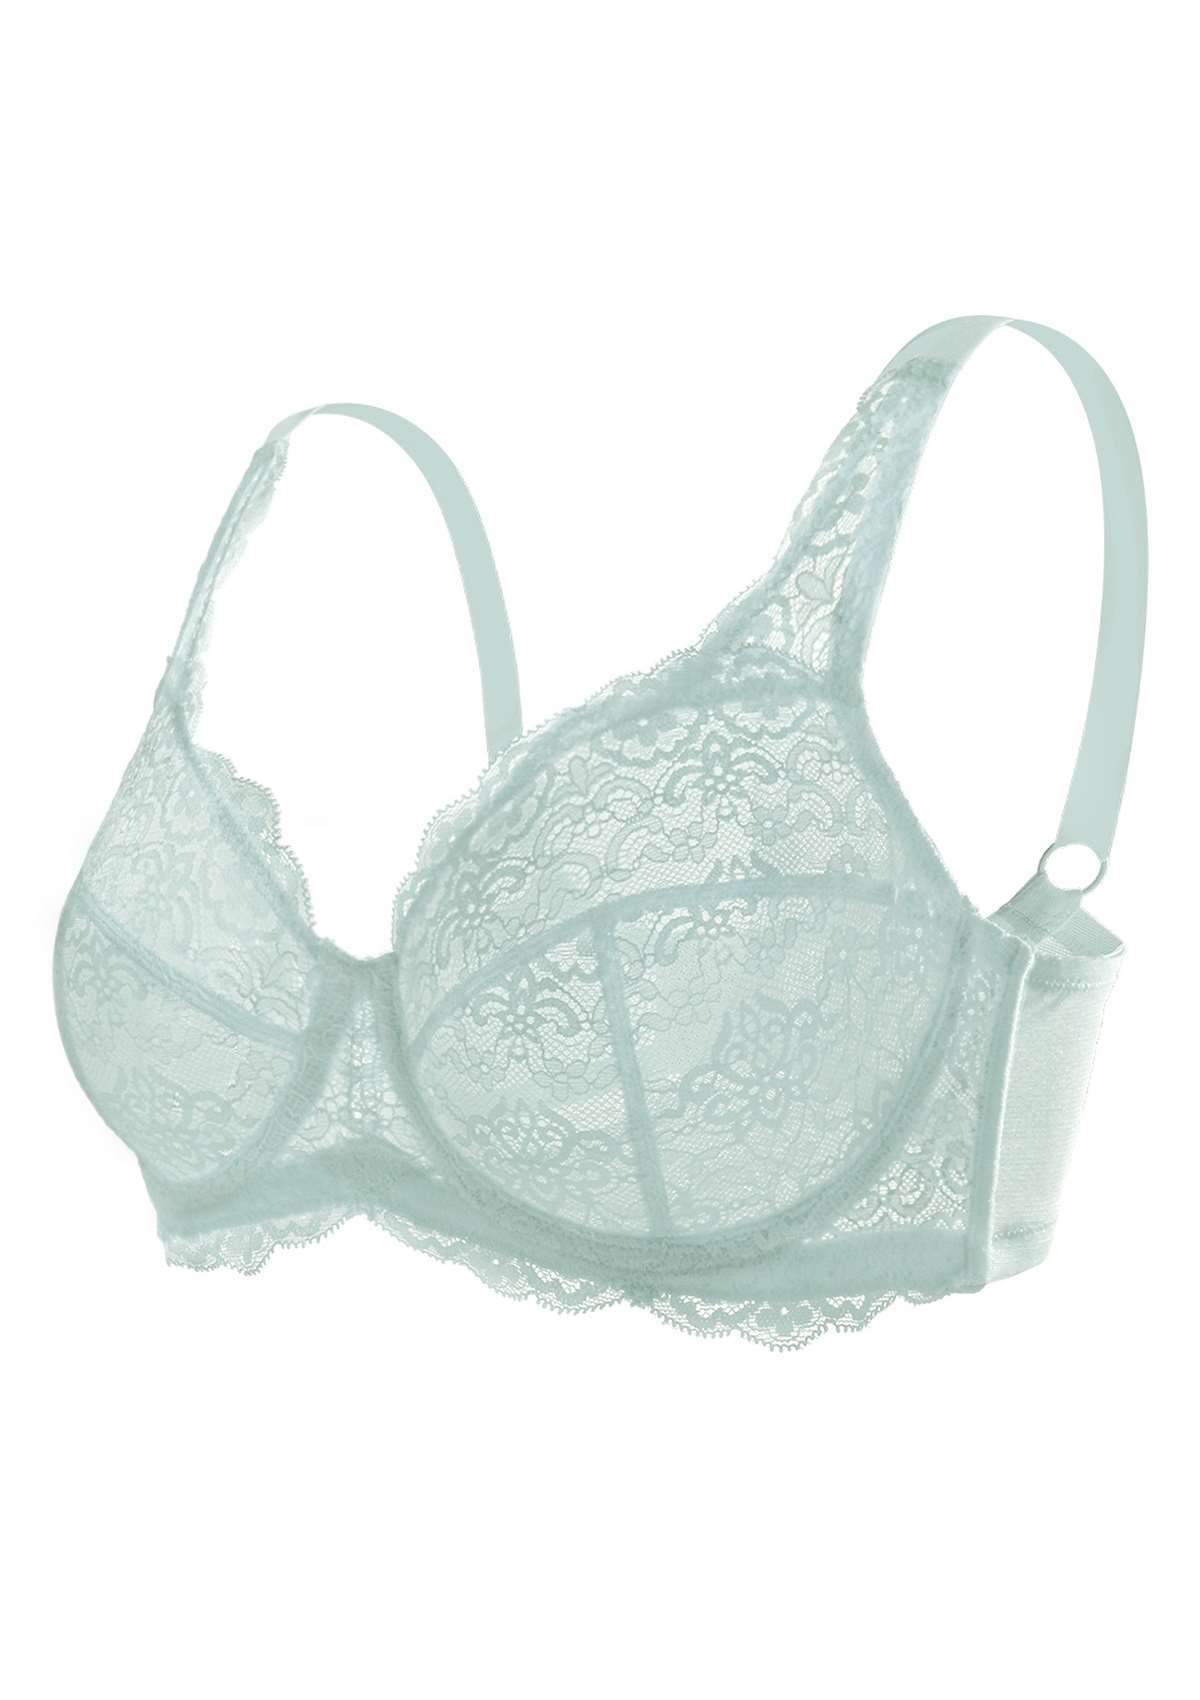 HSIA All-Over Floral Lace: Best Bra For Elderly With Sagging Breasts - Pewter Blue / 34 / DDD/F